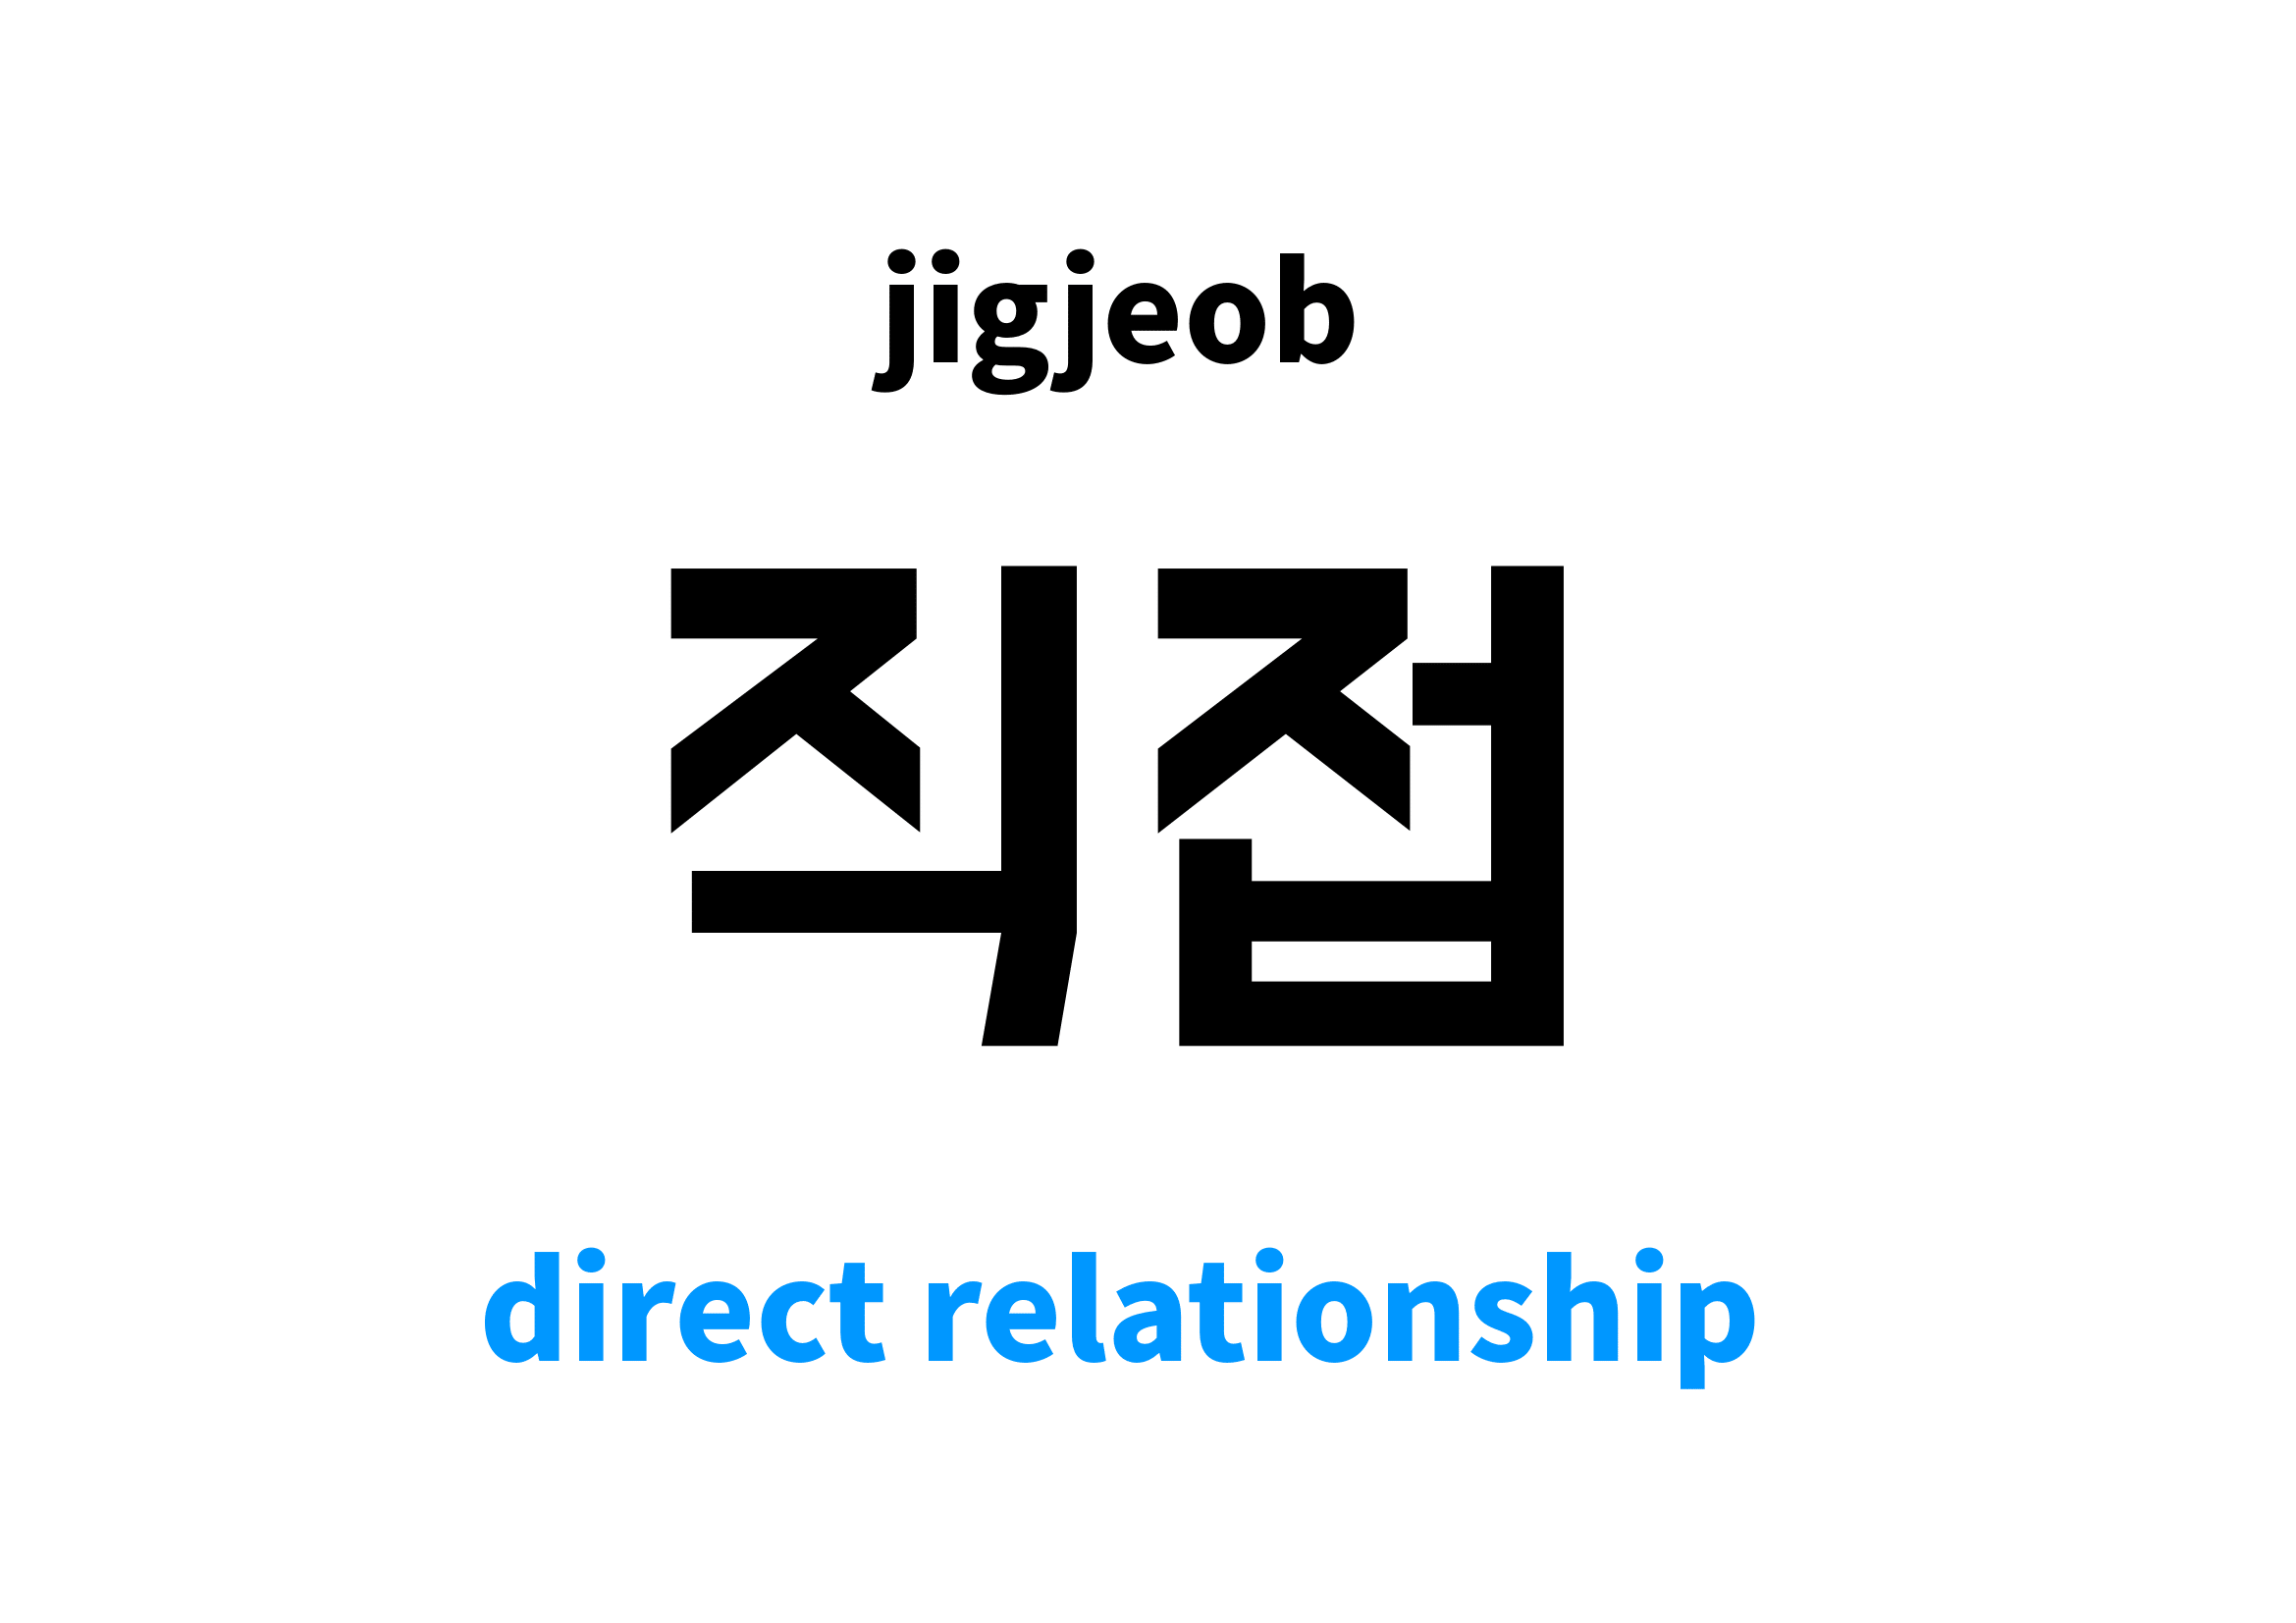 Direct Relationship in Korean, 직접 meaning